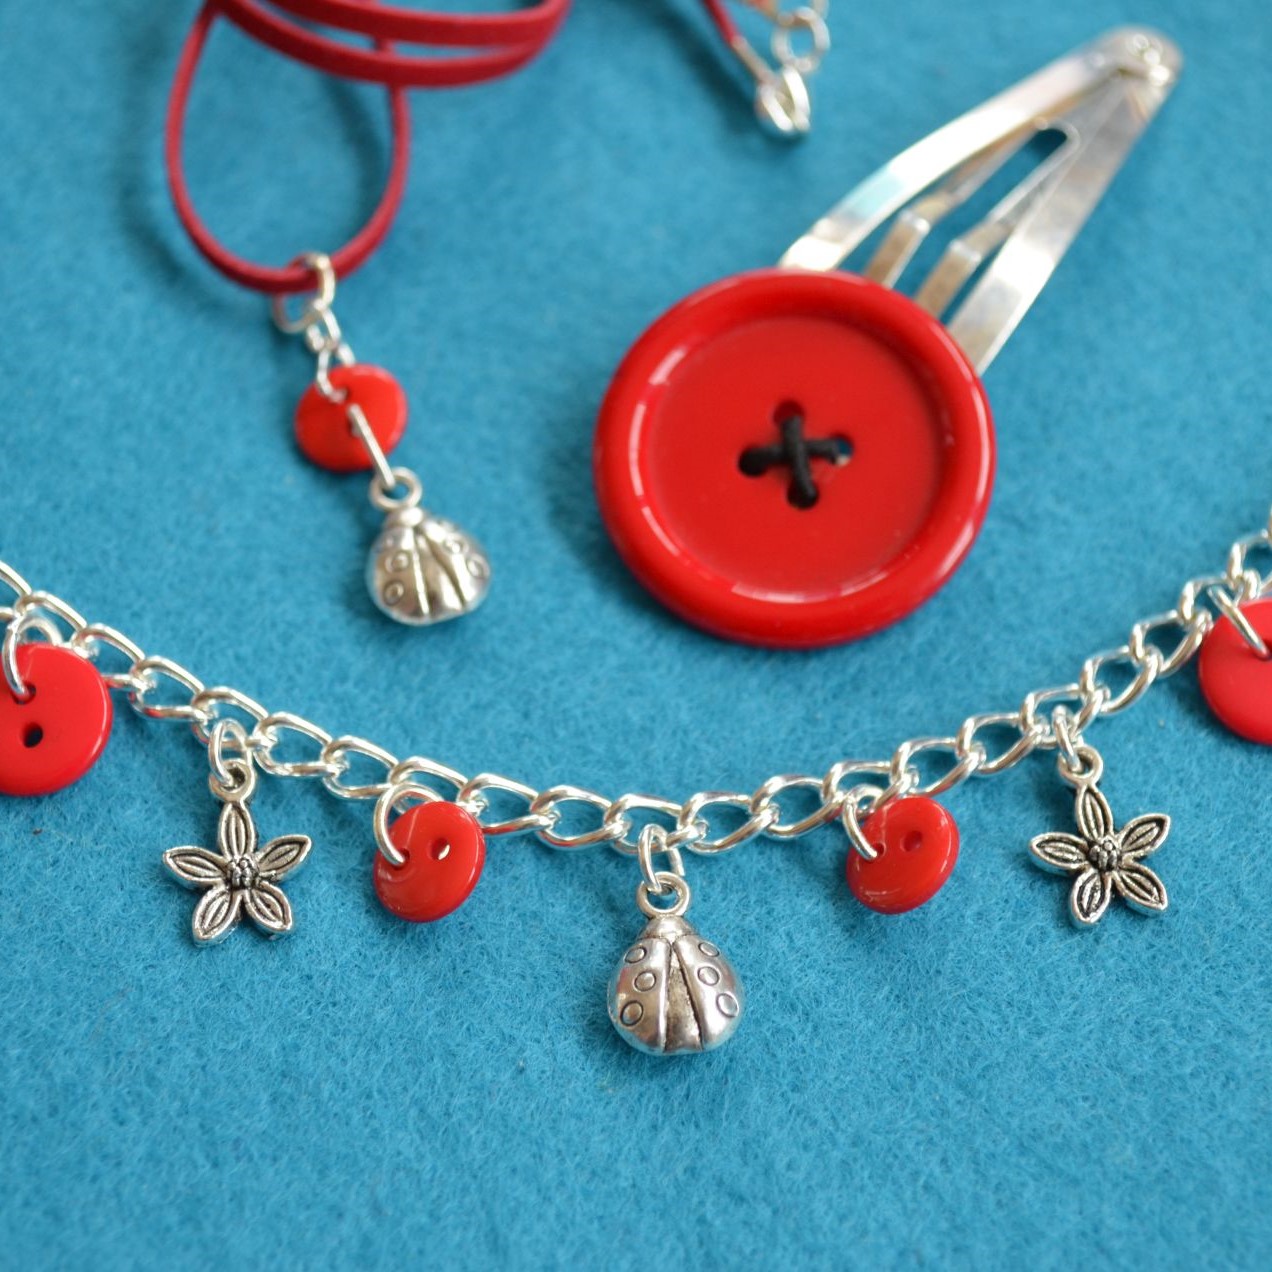 Ladybird Child’s Button Charm Necklace